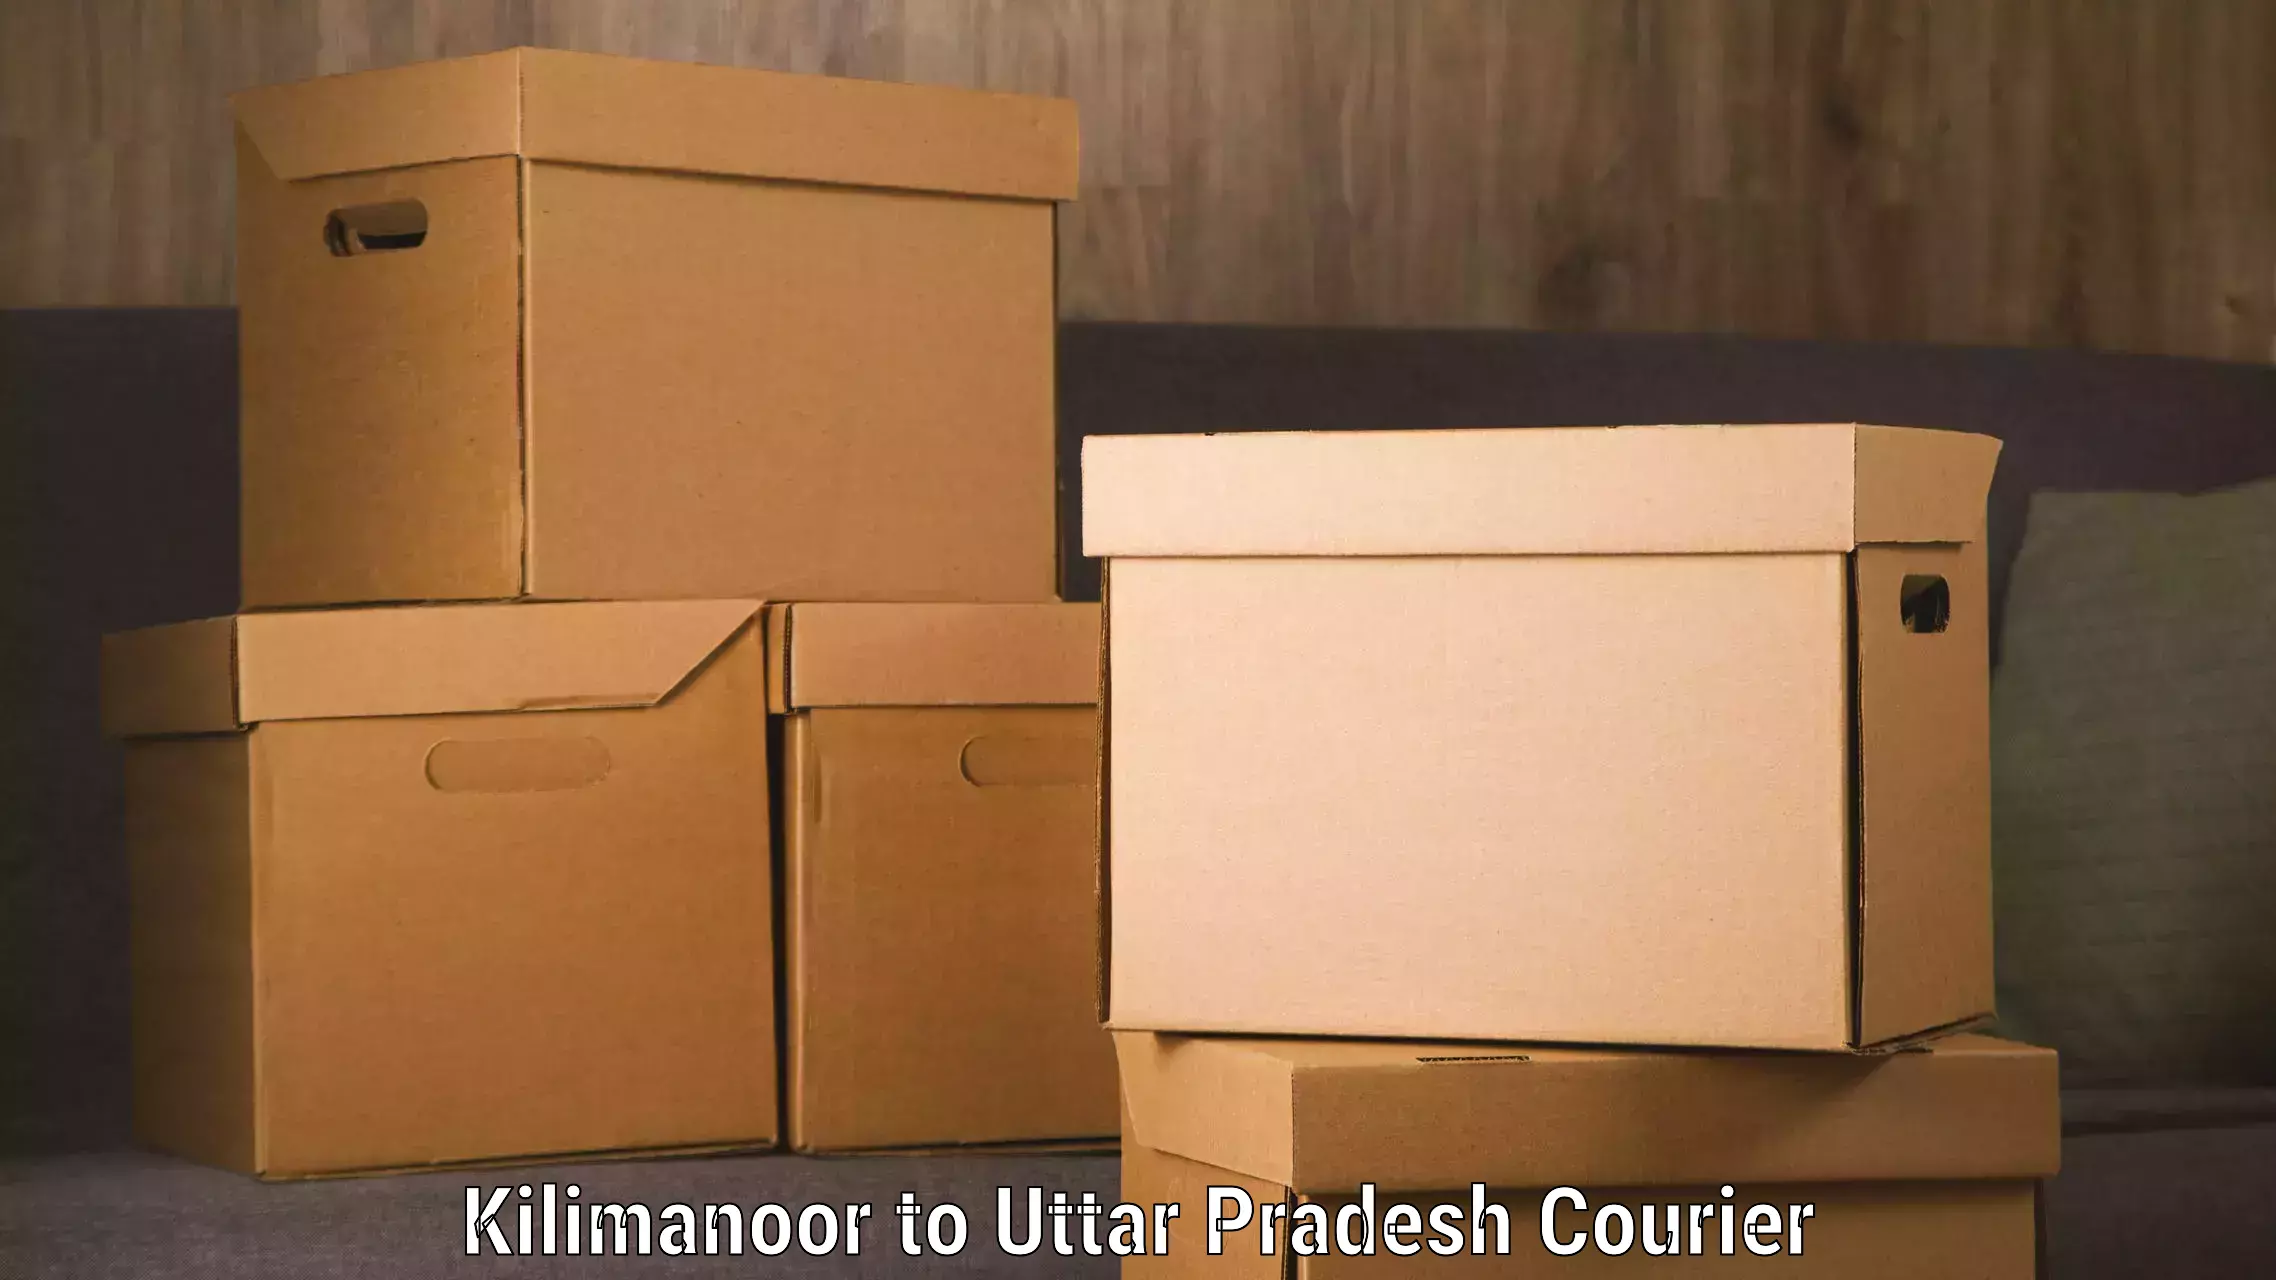 Customized delivery options Kilimanoor to Aligarh Muslim University